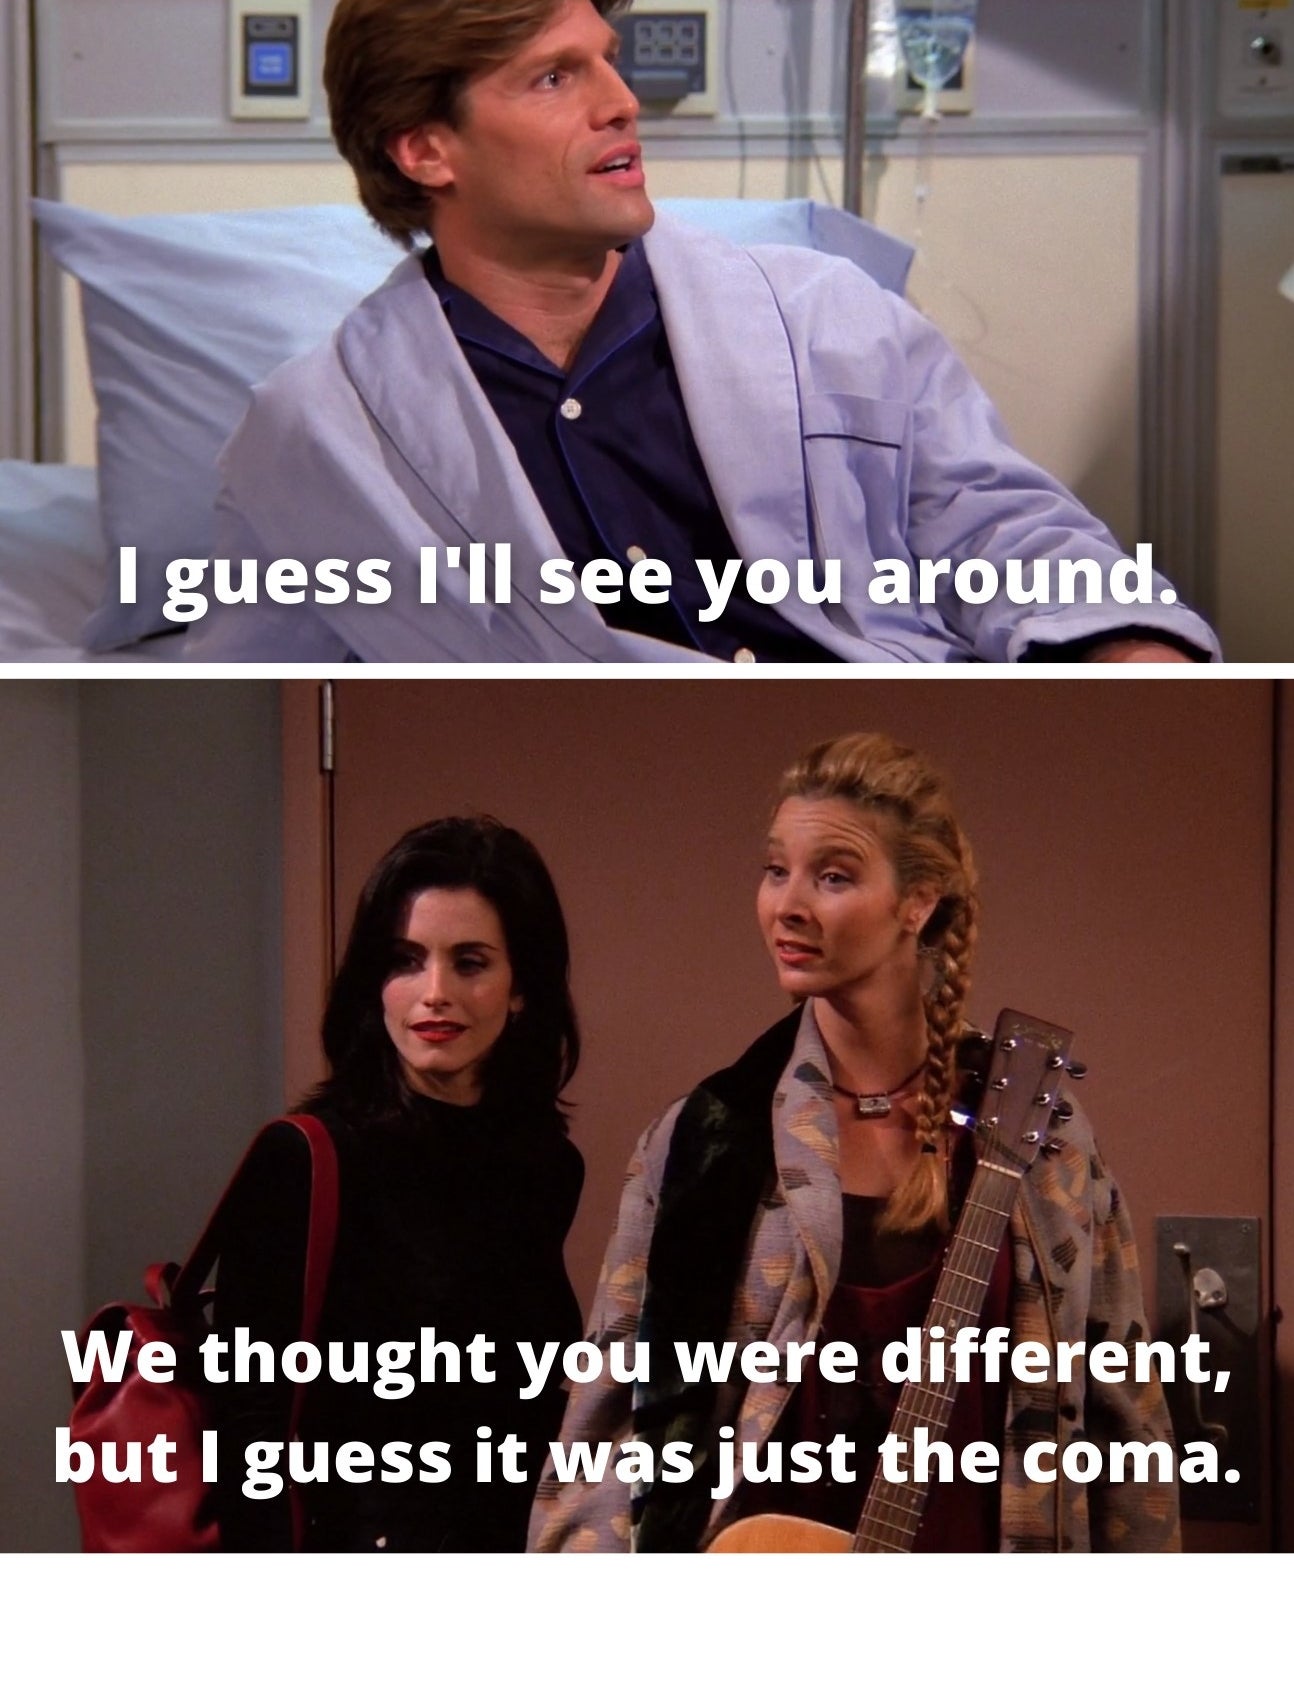 Coma guy saying, &quot;I guess I&#x27;ll see you around&quot; and Phoebe saying, &quot;We thought you were different, but I guess it was just the coma&quot;<br />
